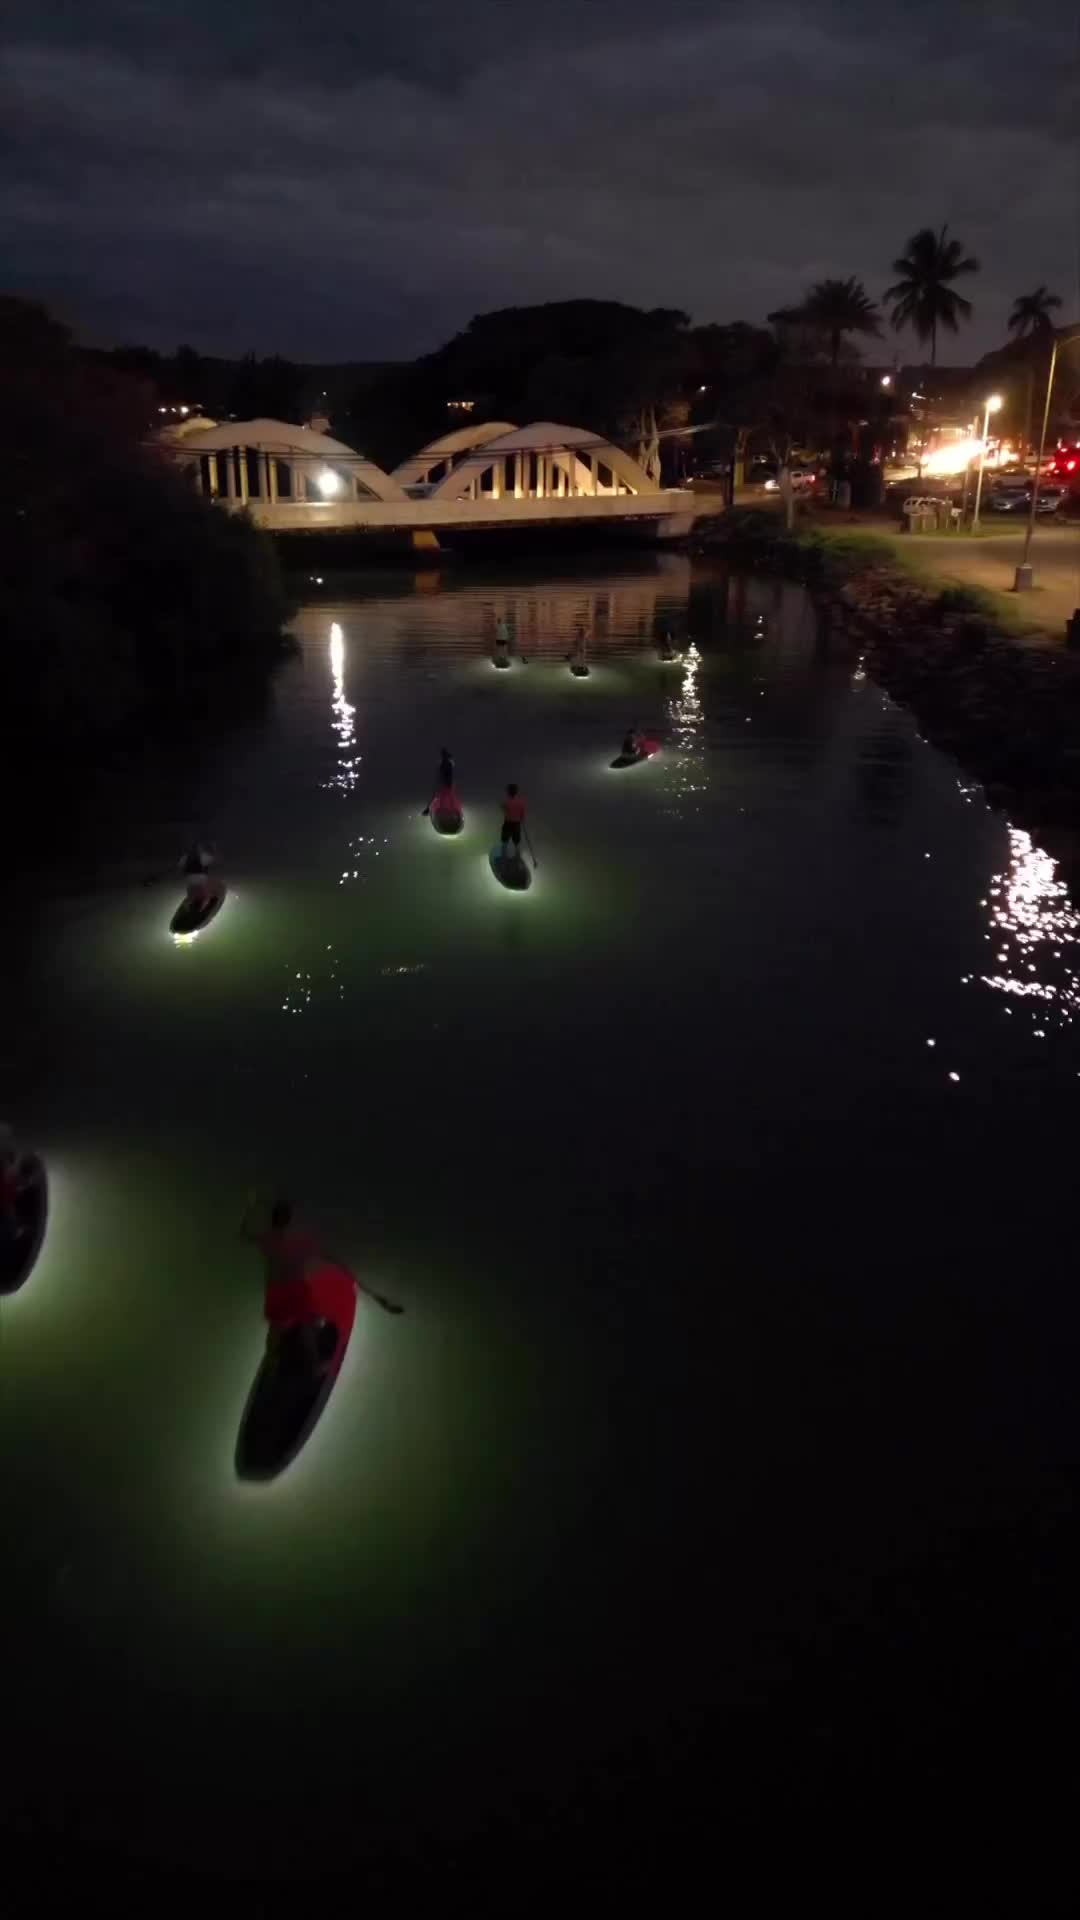 Evening SUP Session on Oahu's Anahulu River 🌙🏝